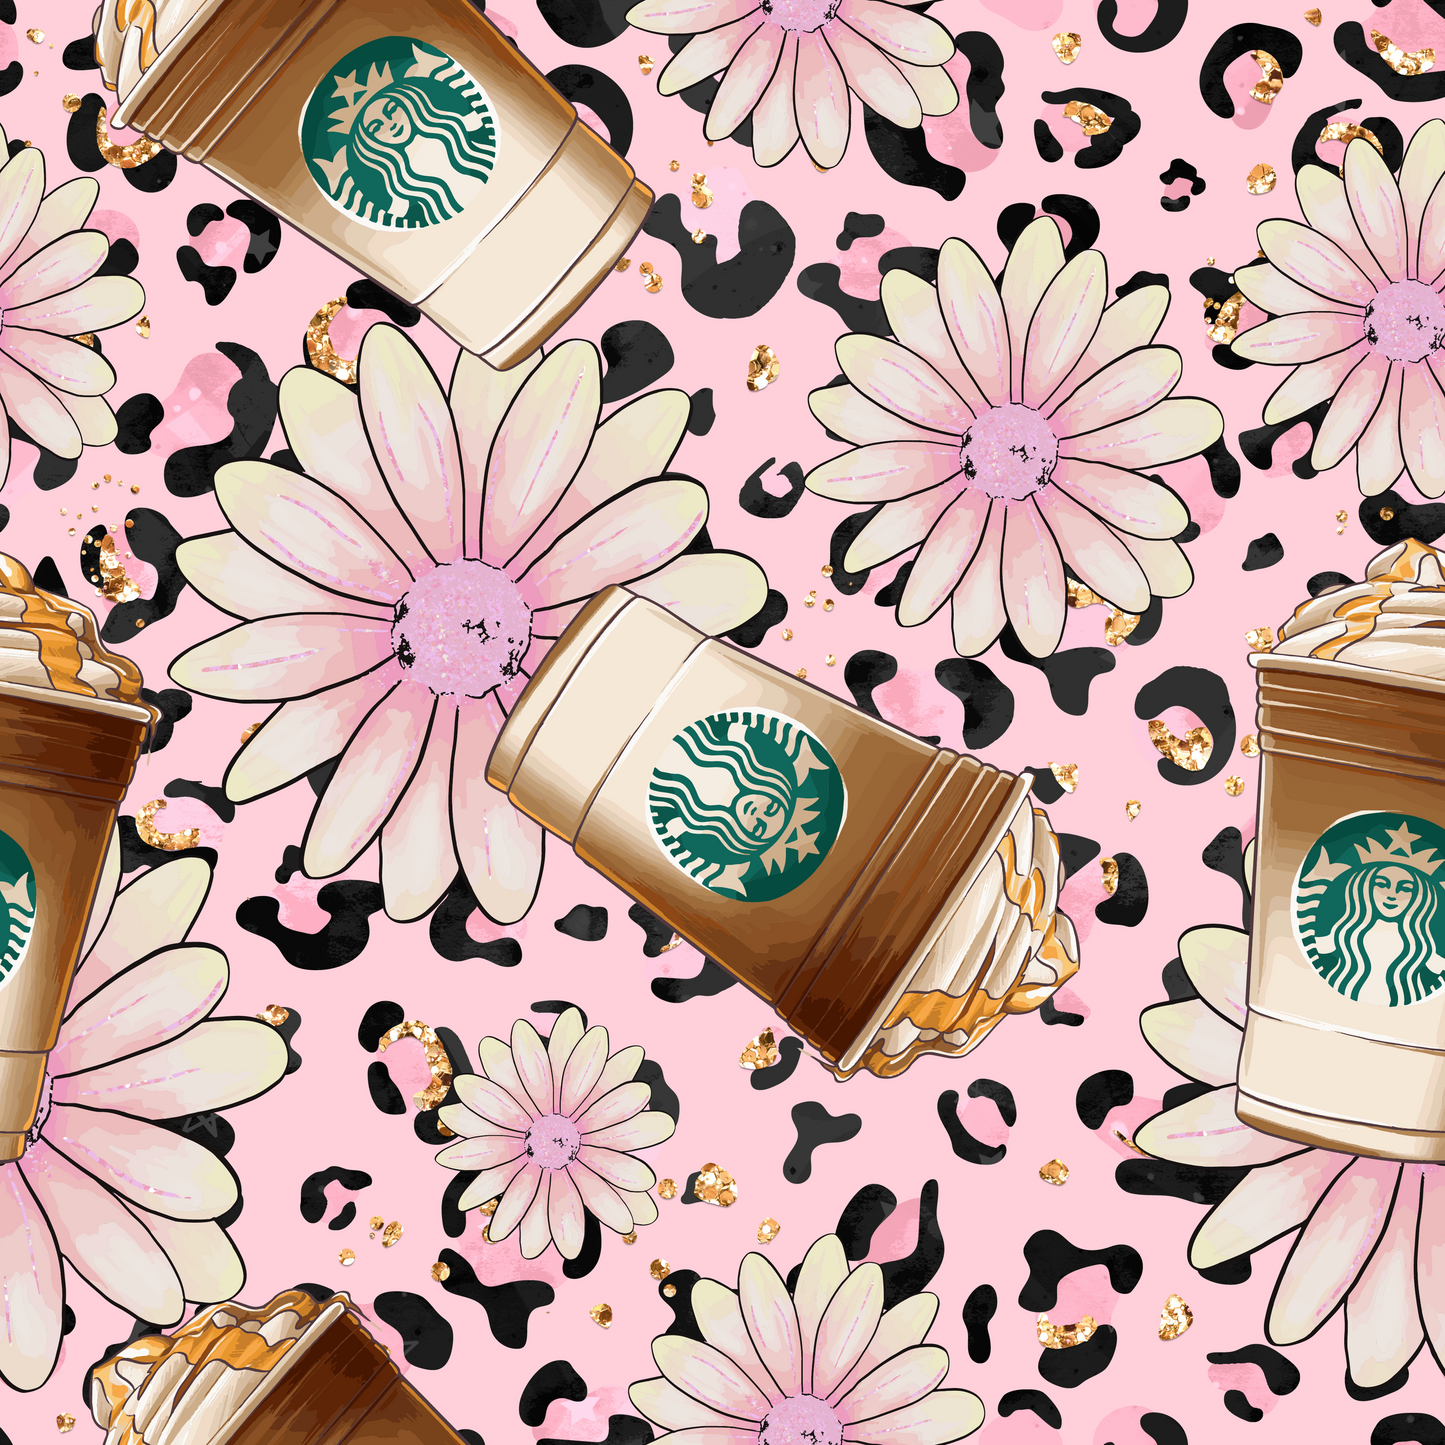 Floral Starbies 12x12